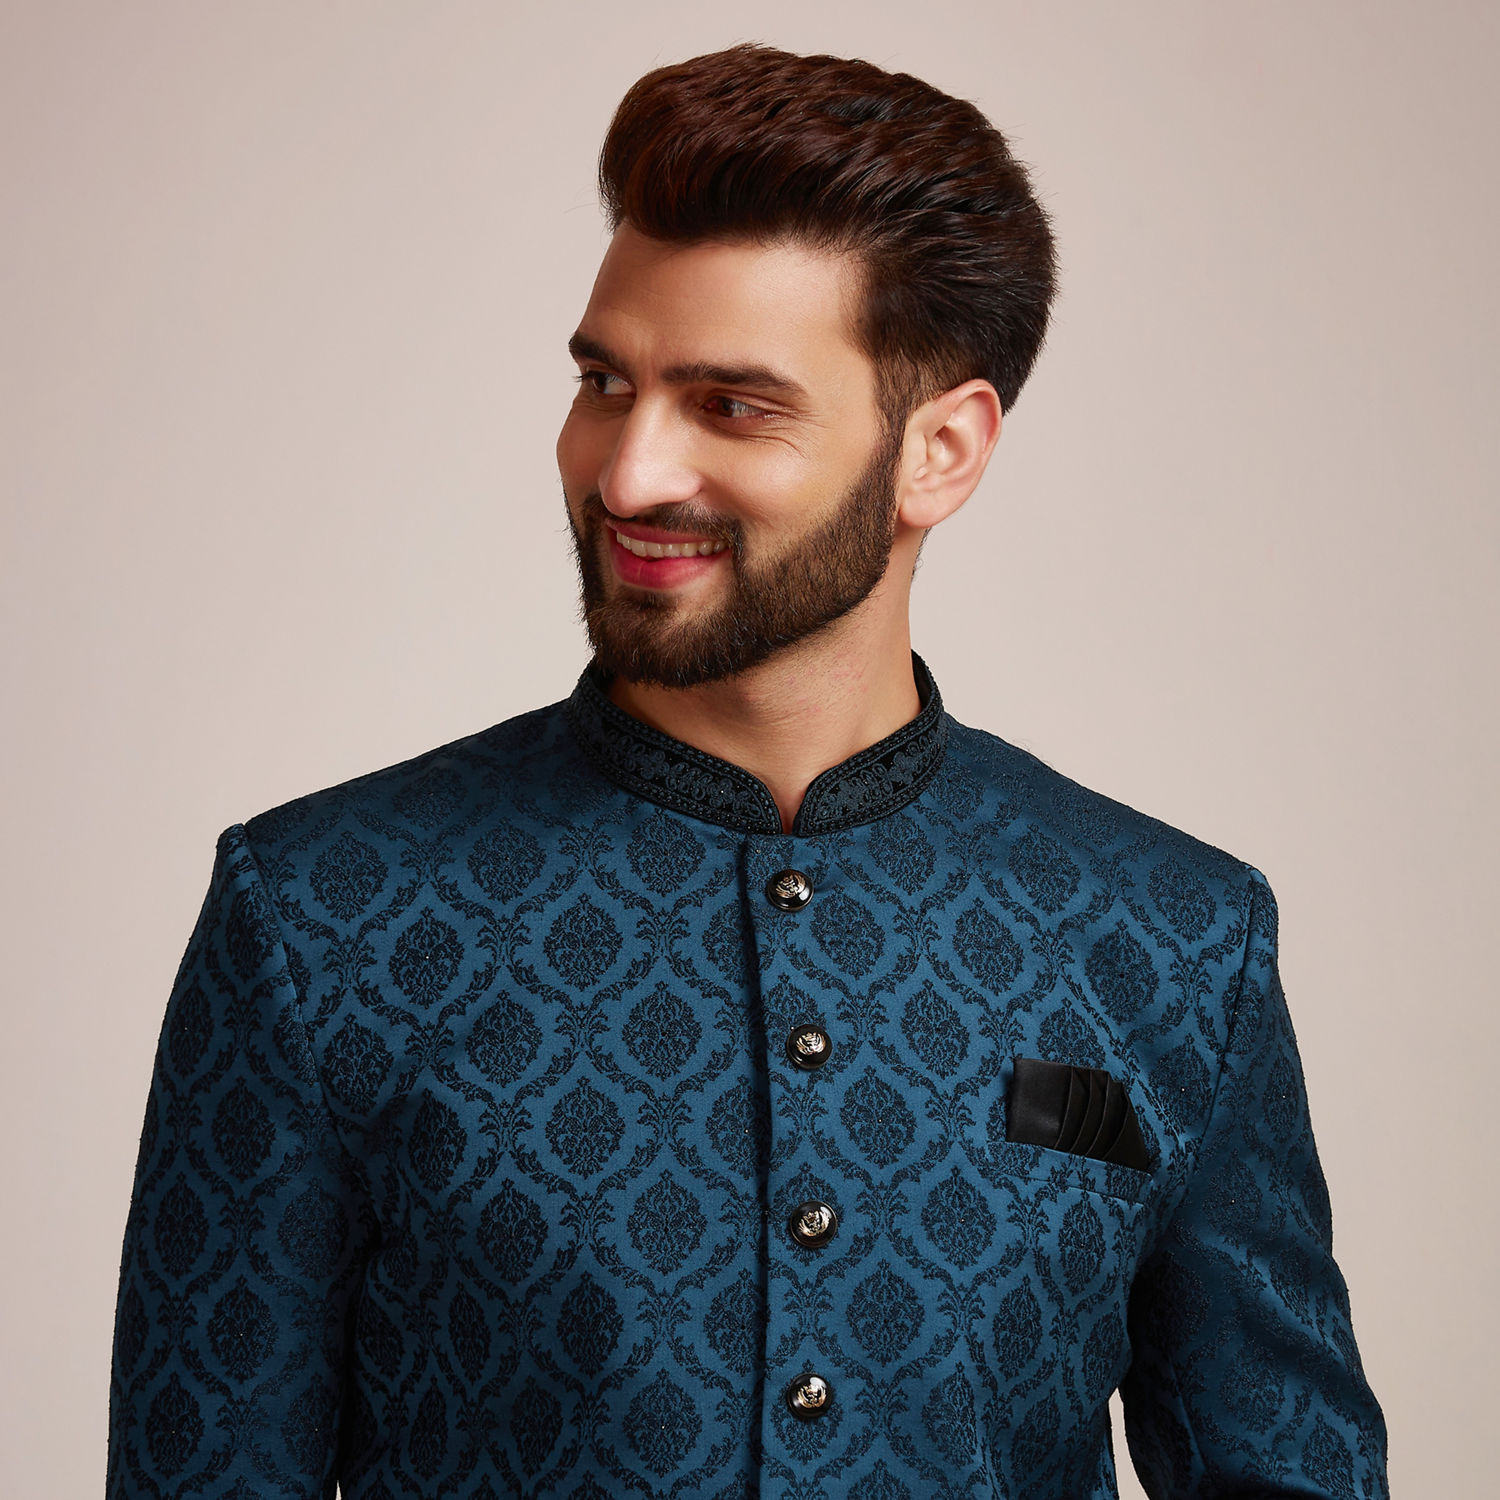 Batras mall - Looking for the perfect outfit for your Sagai, Sangeet, or  Shaadi? Look no further! 👀🕴 Our collection has something for every  occasion. #SagaiSeShaadiTak #WeddingSeason #IndianWeddings #BridalFashion  #GroomStyle . . #